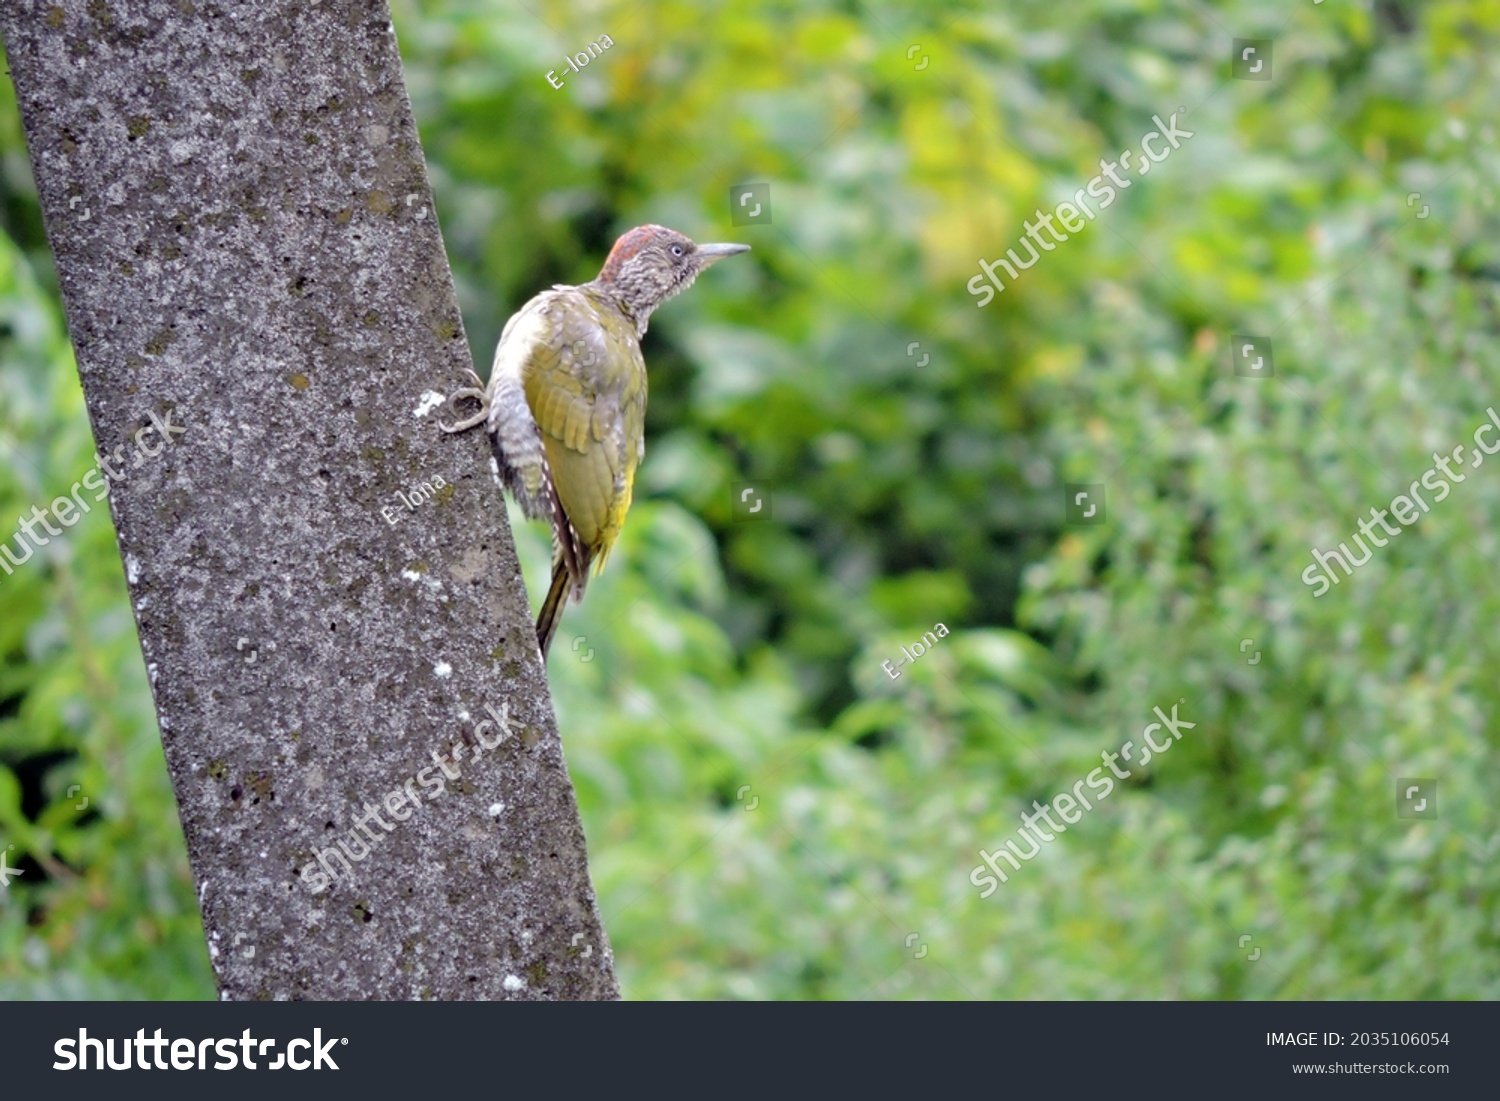 The juvenile European green woodpecker sitting on a concrete pylon, green blurred trees in the background #2035106054